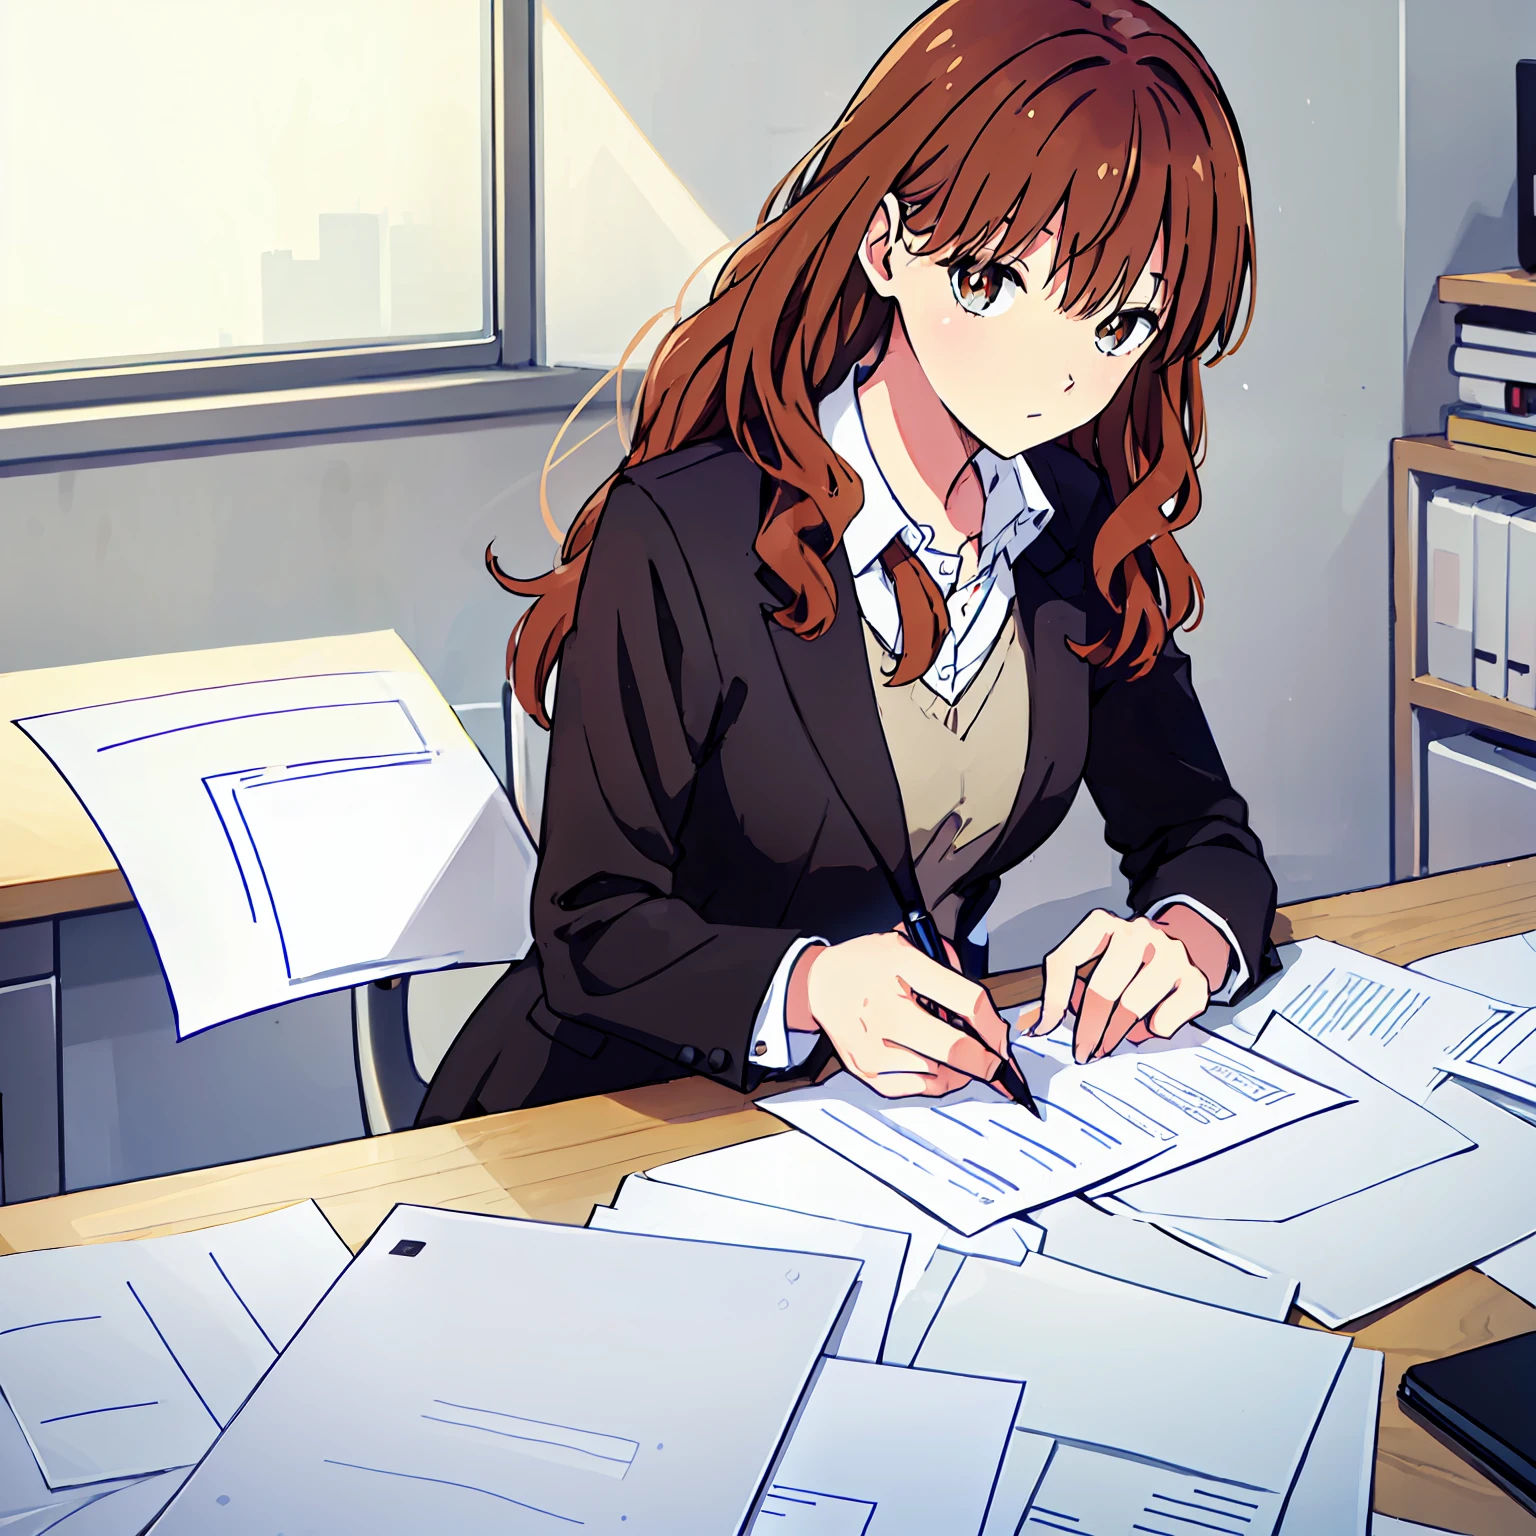 1 girl, long hair, brown hair, wavy upper-back length, brown eyes, black blazer, grey blouse, white pantyhouse, inside office, on top office desk, computer, smartphone, printers, papers, hold a pen in right hand